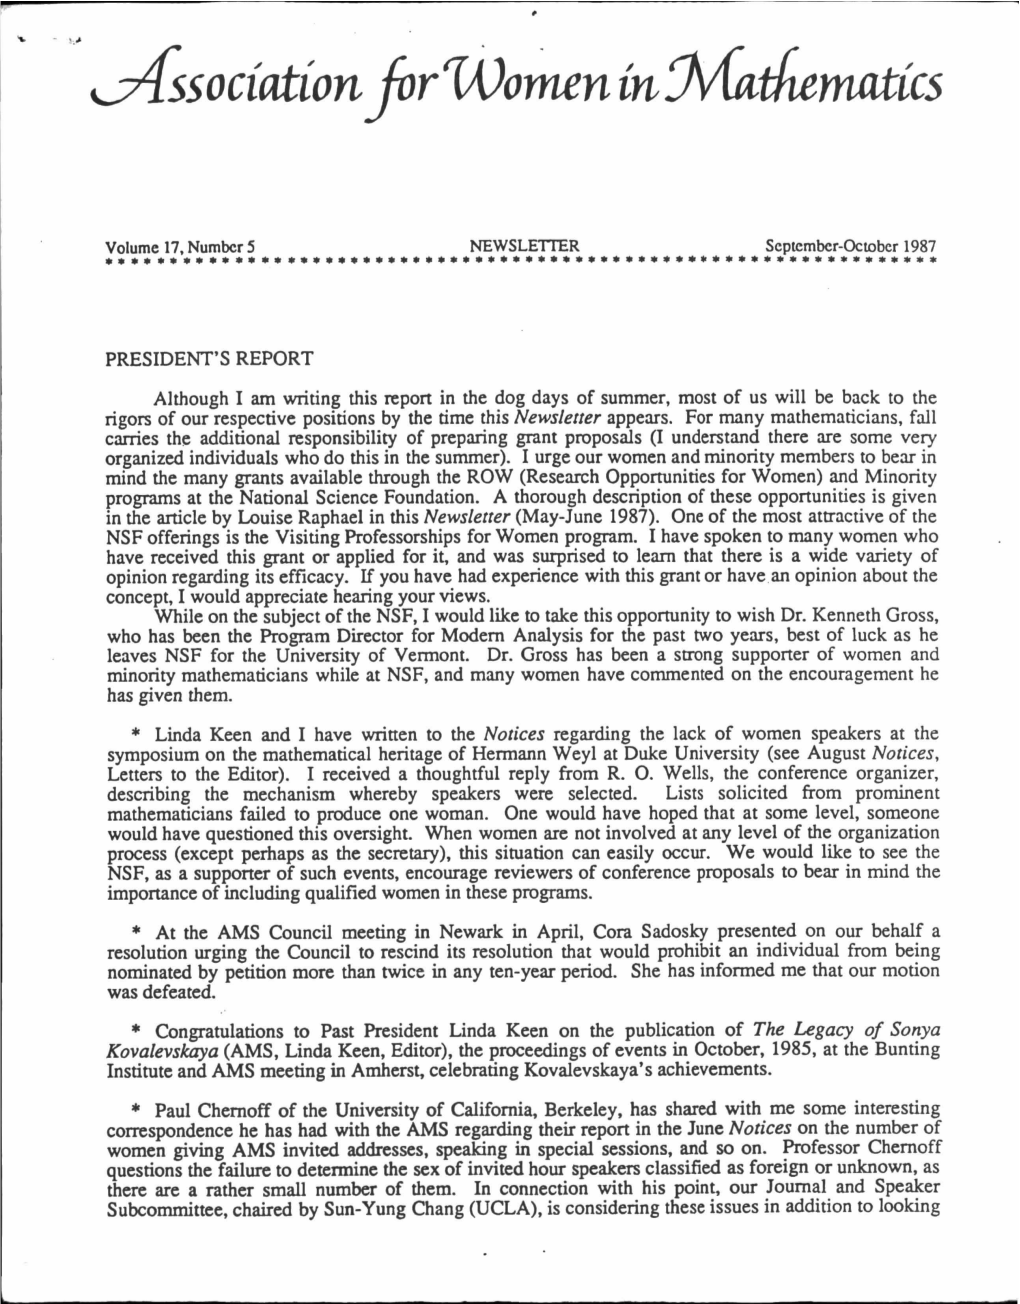 NEWSLETI'er September-October 1987 PRESIDENT's REPORT Although I Am Writing This Report in the Dog Days of Summer, Most of Us Wi